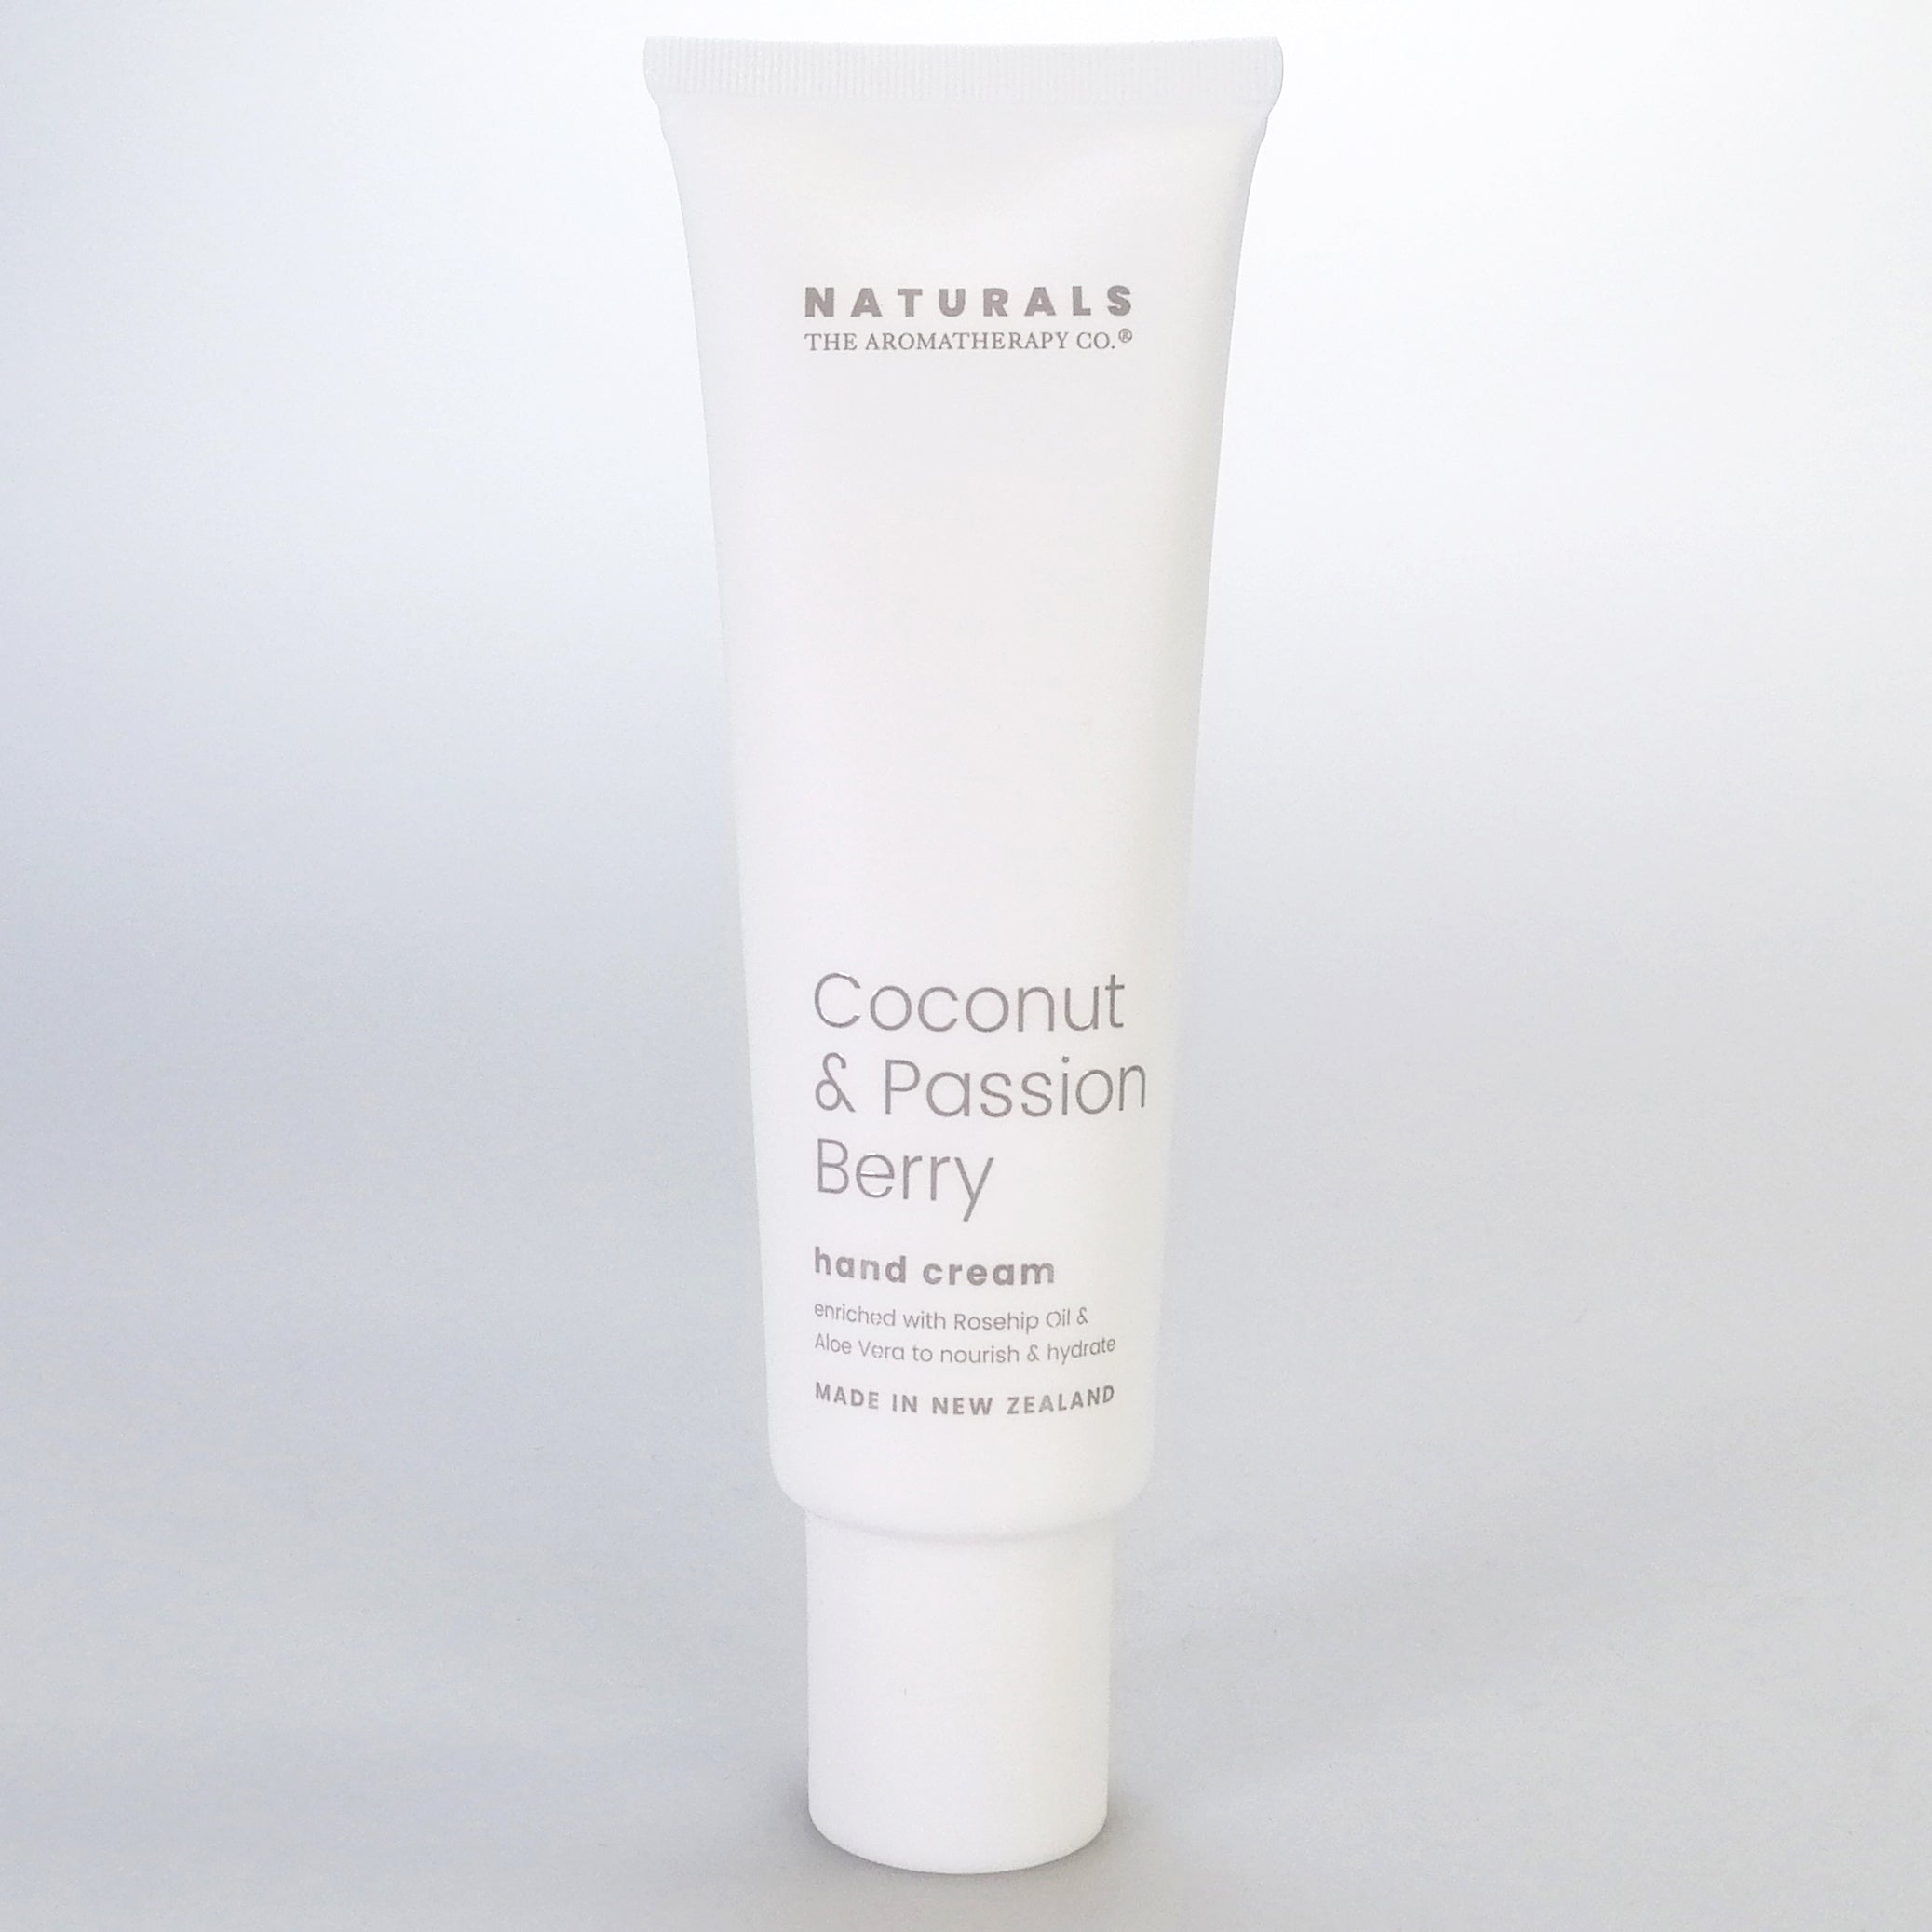 The Aromatherapy Co. Naturals - Coconut & Passion Berry Hand Cream